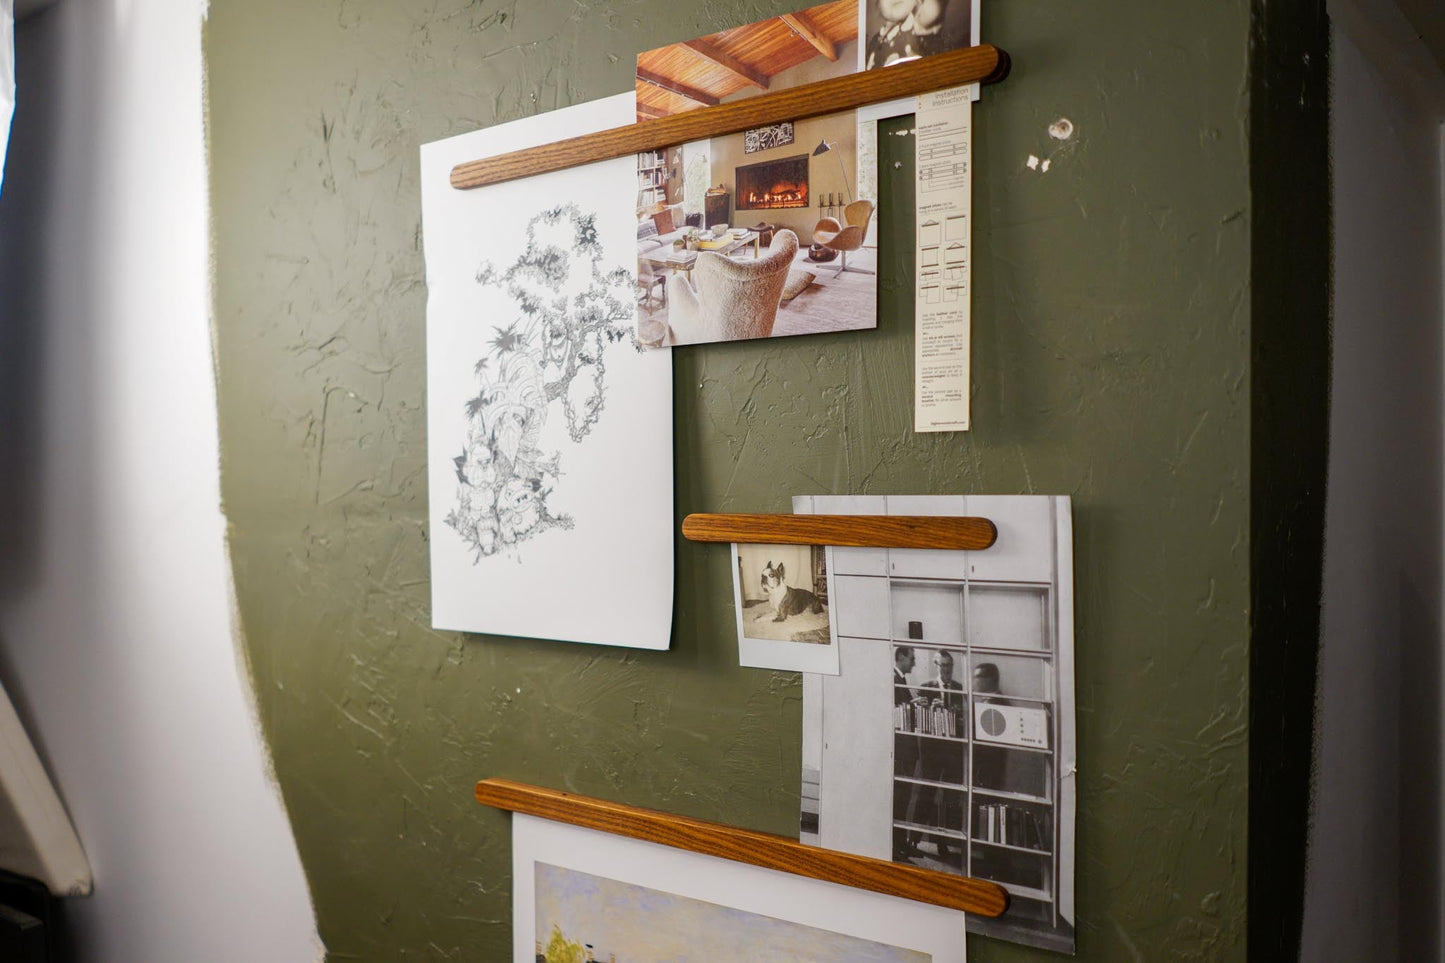  The Magnet Sticks, by Biglow Woodcraft; a wooden support for papers, photographs and images. A set of magnet sticks with photographs installed on a green wall. Hardwood Roasted ash